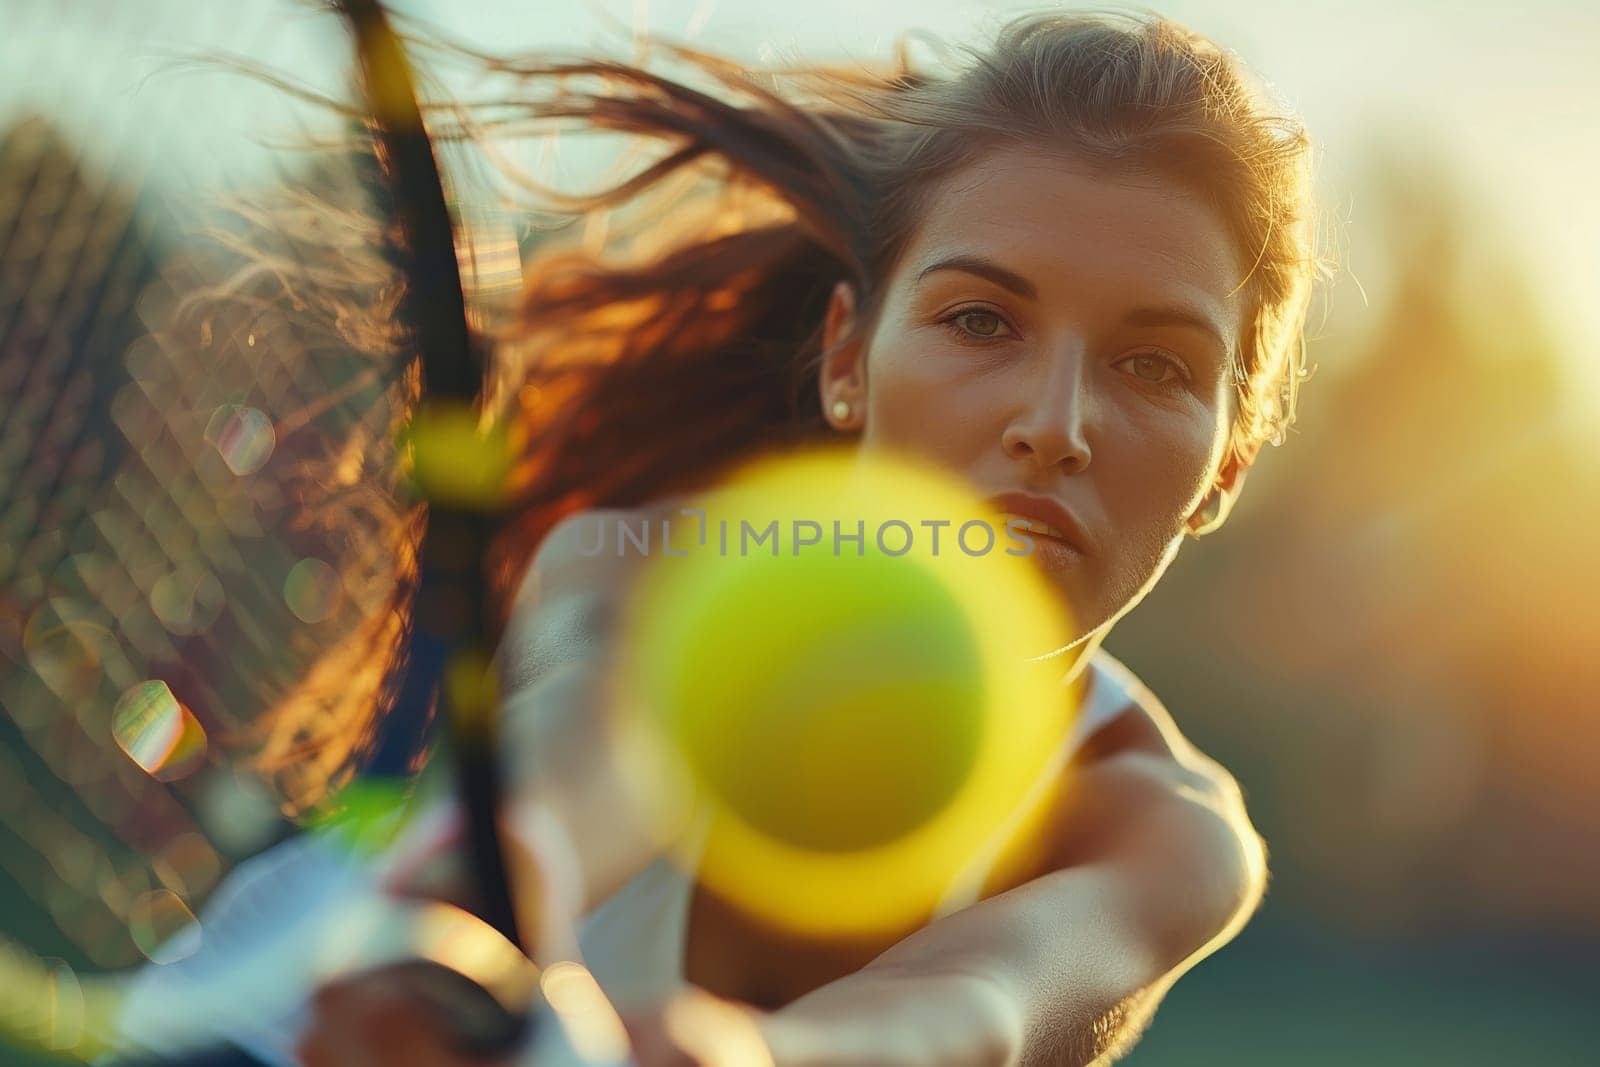 A woman is playing tennis and is about to hit a yellow ball with her racket by itchaznong